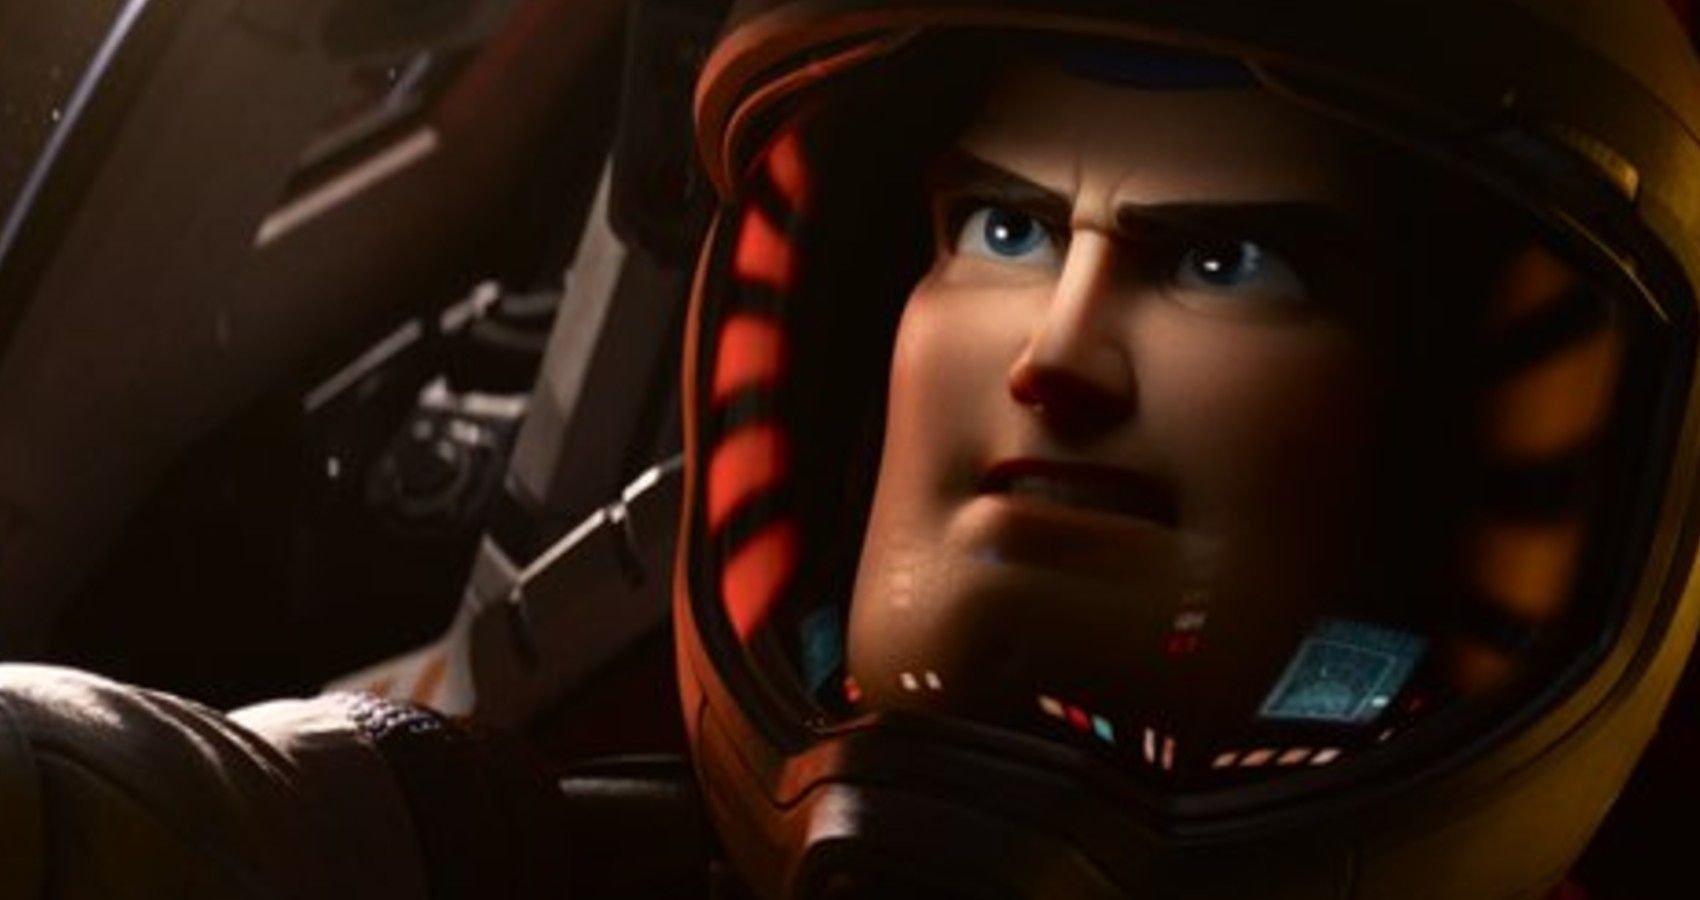 A shot form the upcoming Lightyear movie from Disney